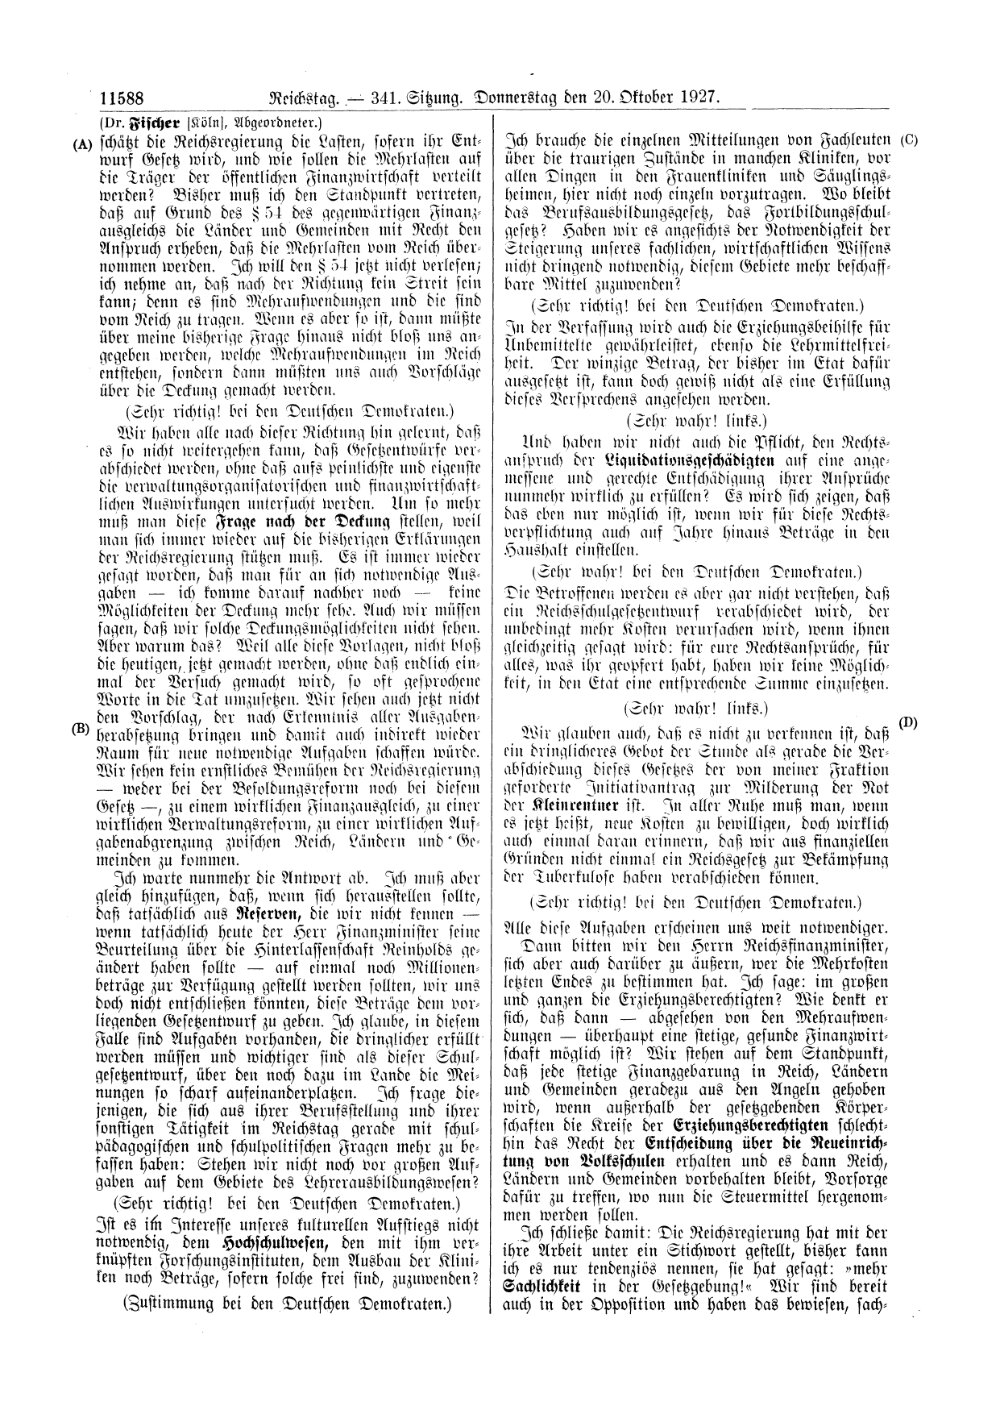 Scan of page 11588